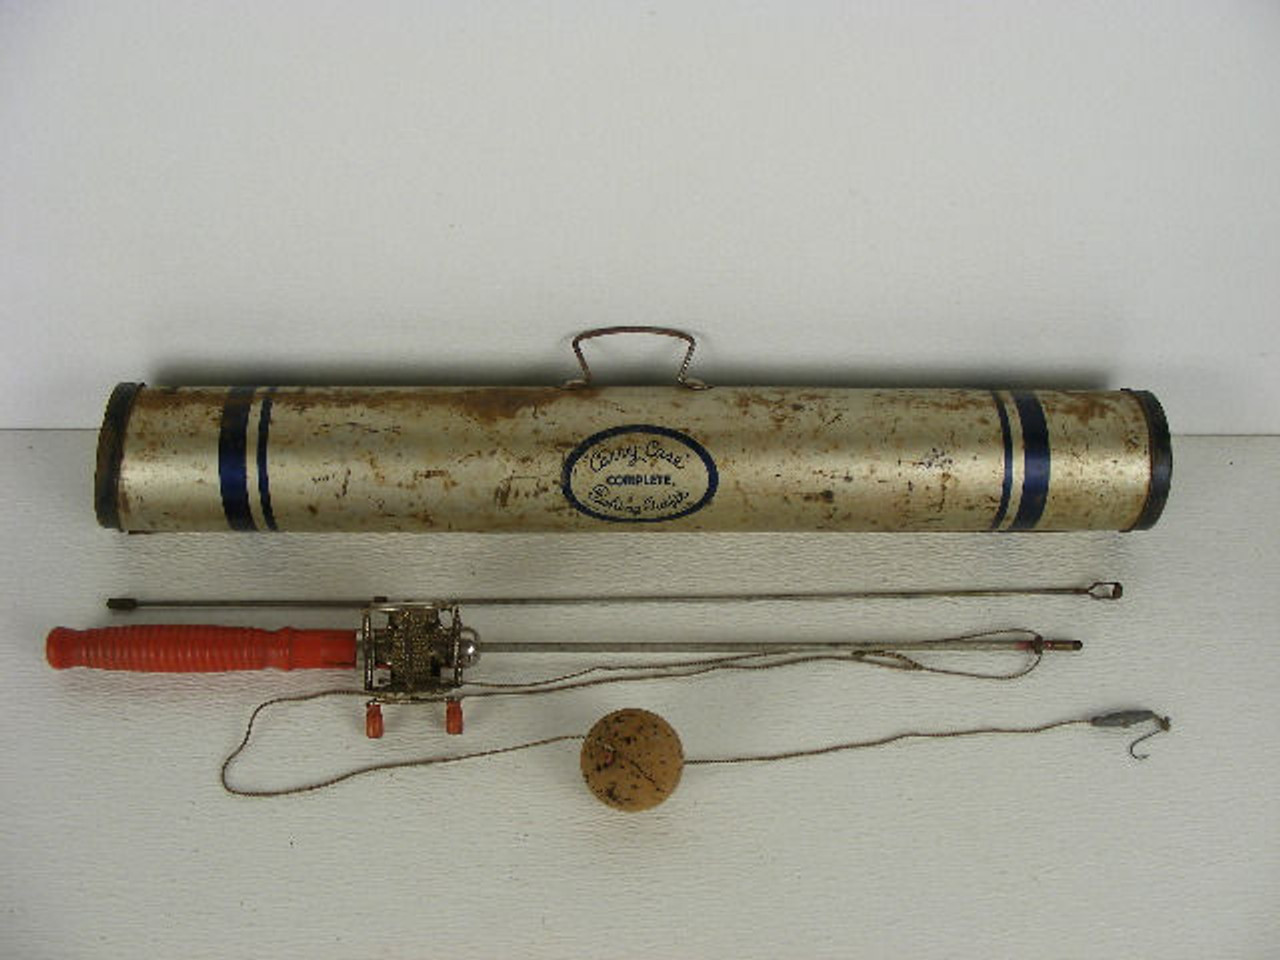 This is a rare old portable breakdown fishing pole that comes in its  original metal tube.The two piece pole has a red wooden handle and threads  together measuring 45" long.The paint is